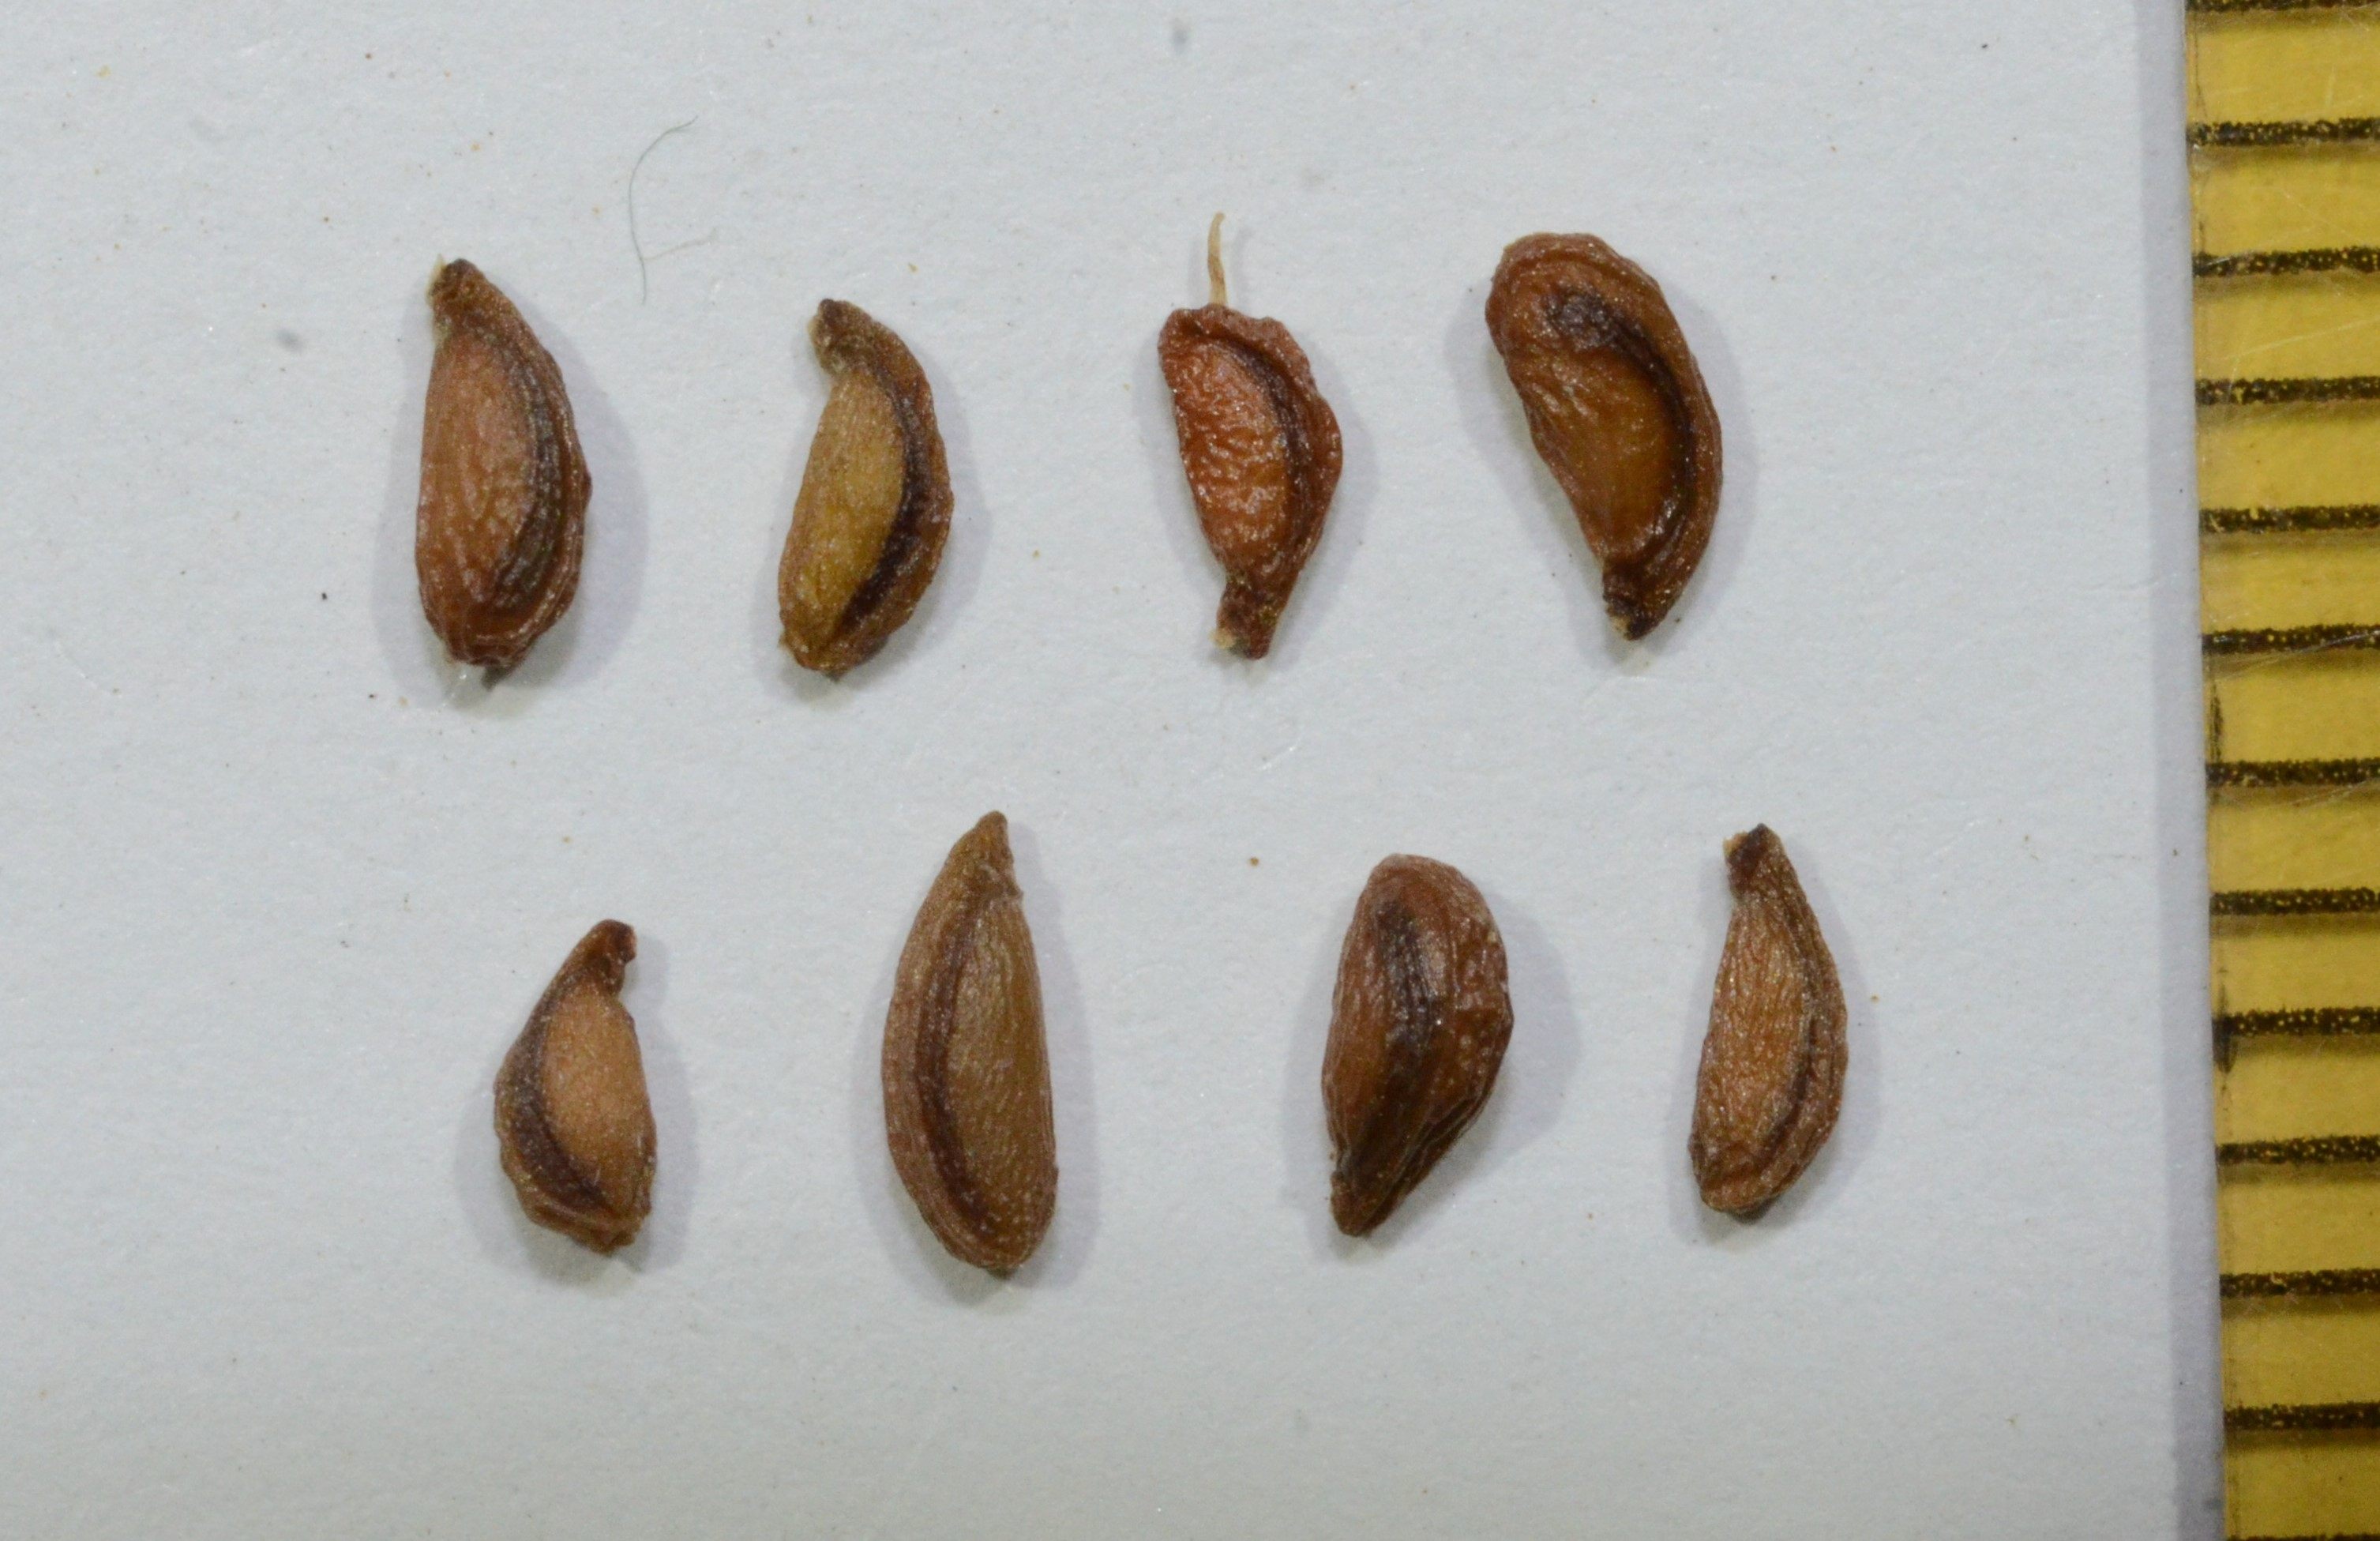 Abronia latifolia seeds with mm ruler on right.